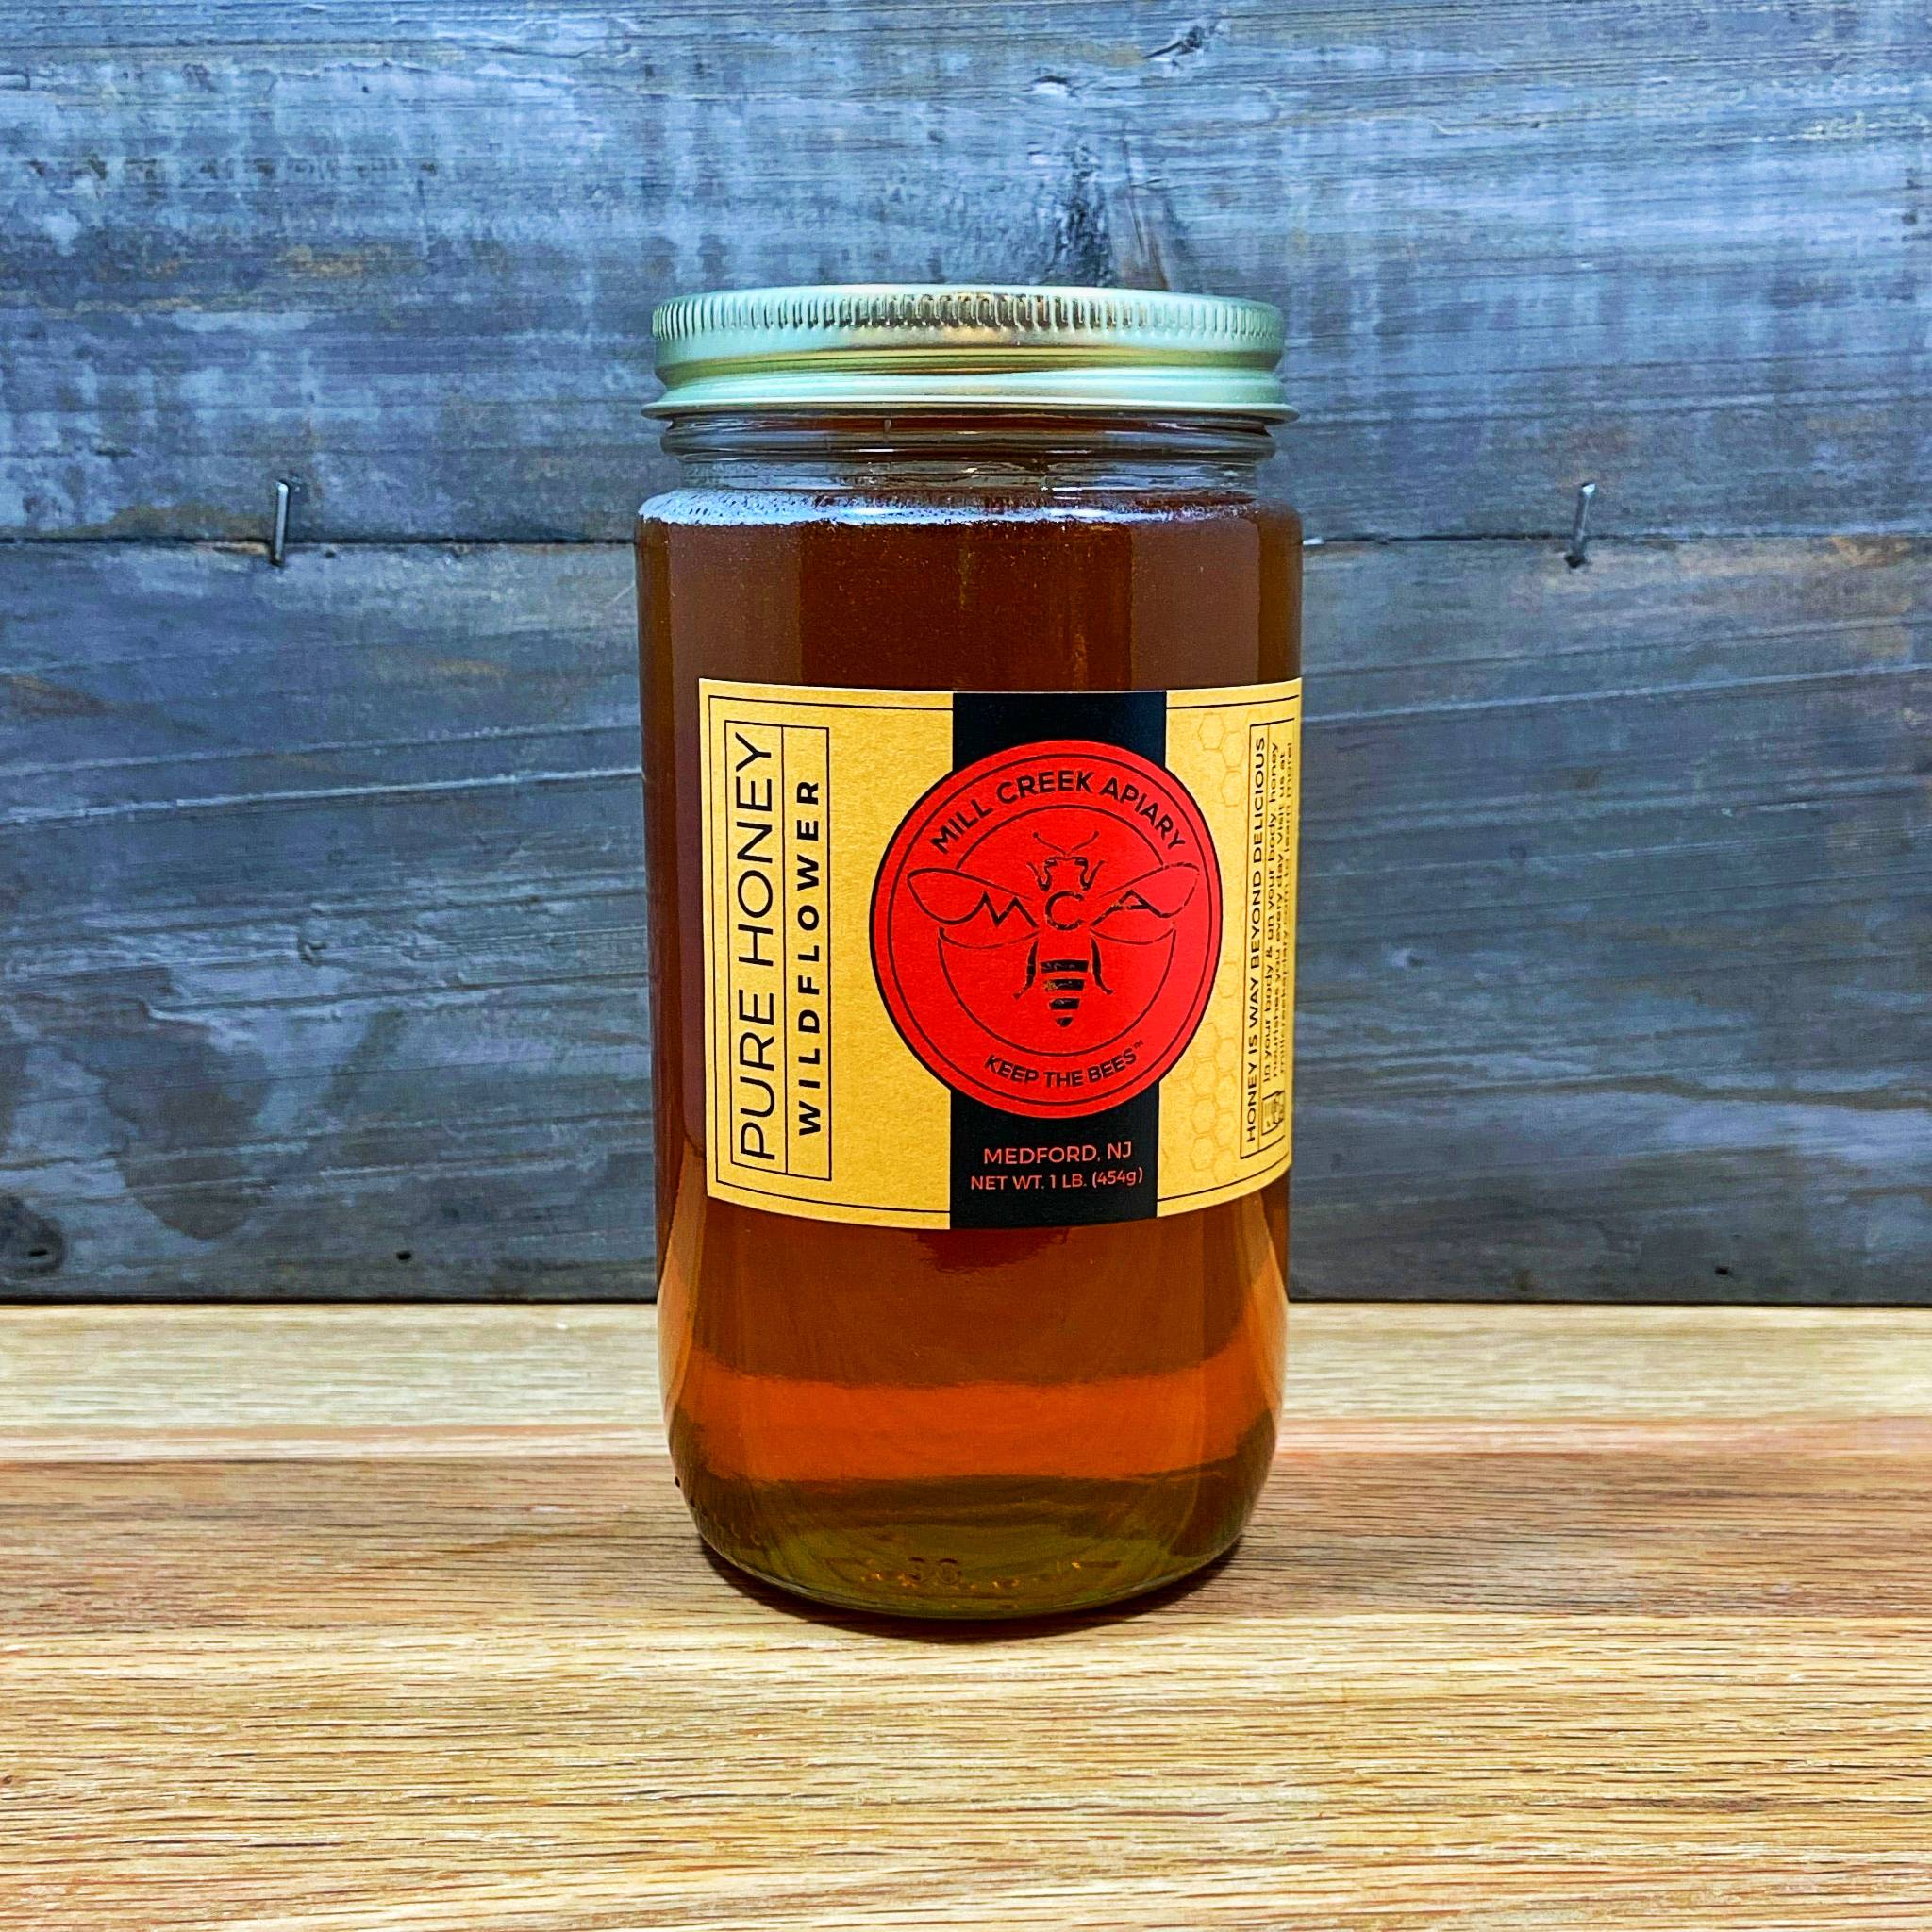 Mill Creek Apiary's wildflower honey has a rich, bold, and floral taste not found in commercial honey